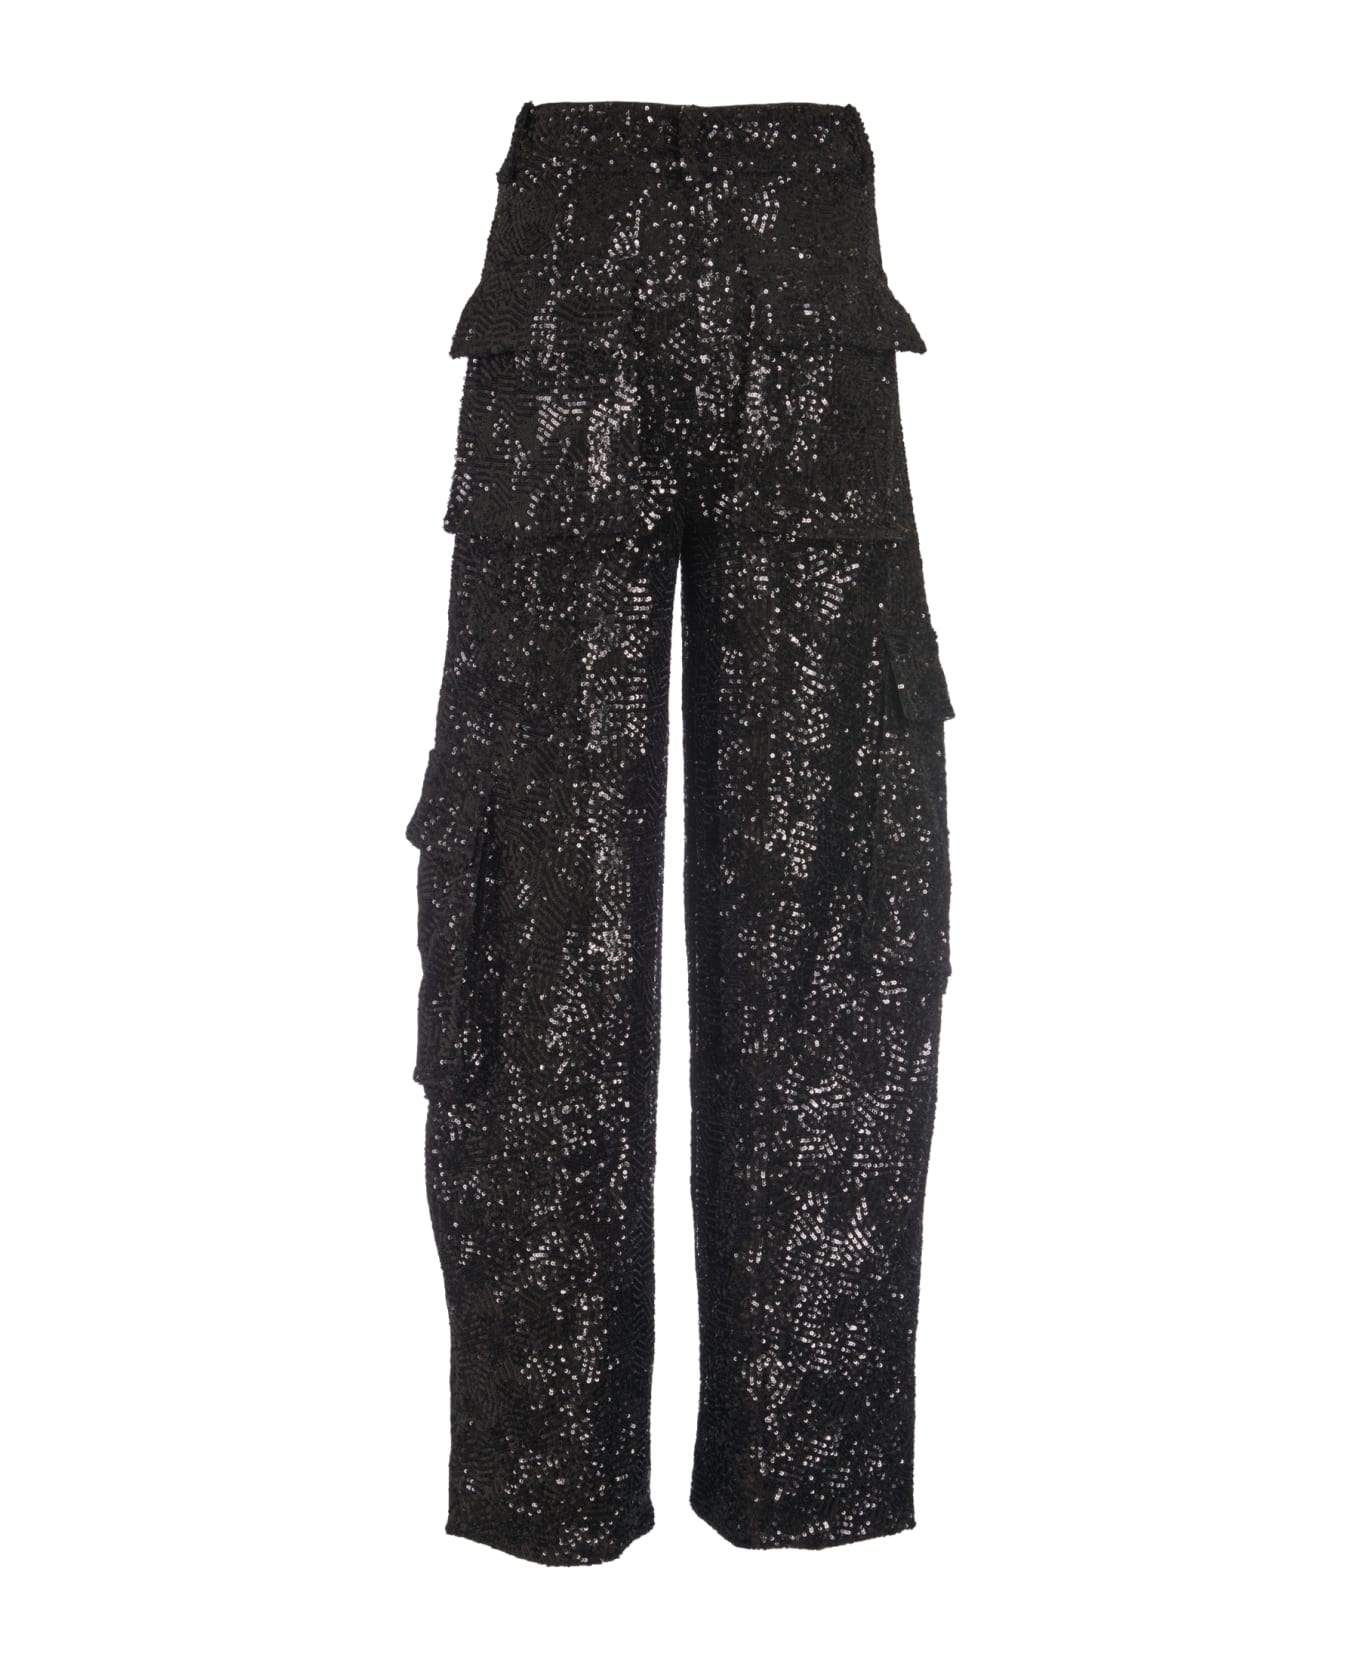 Rotate by Birger Christensen Sequin Cargo Trousers - Black